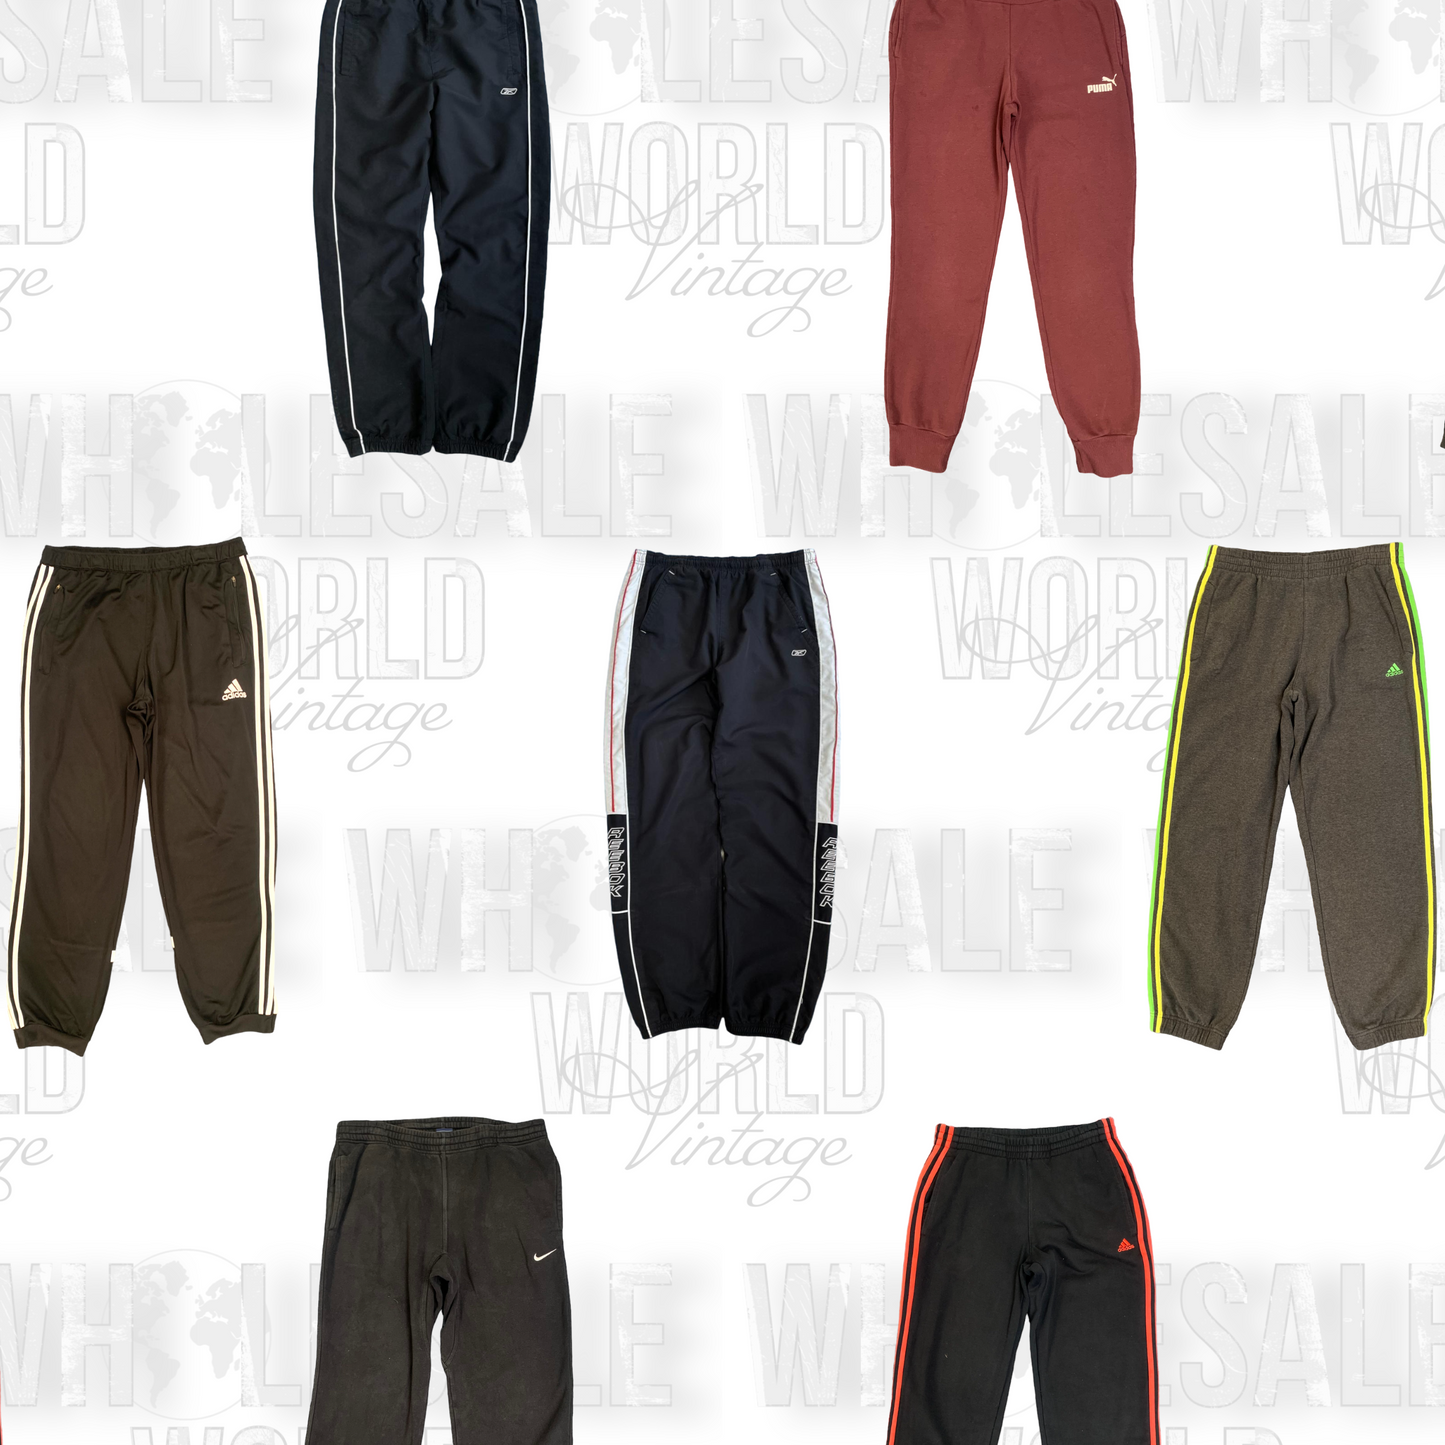 BRANDED JOGGERS / TRACK PANTS - GRADE A - 50pc